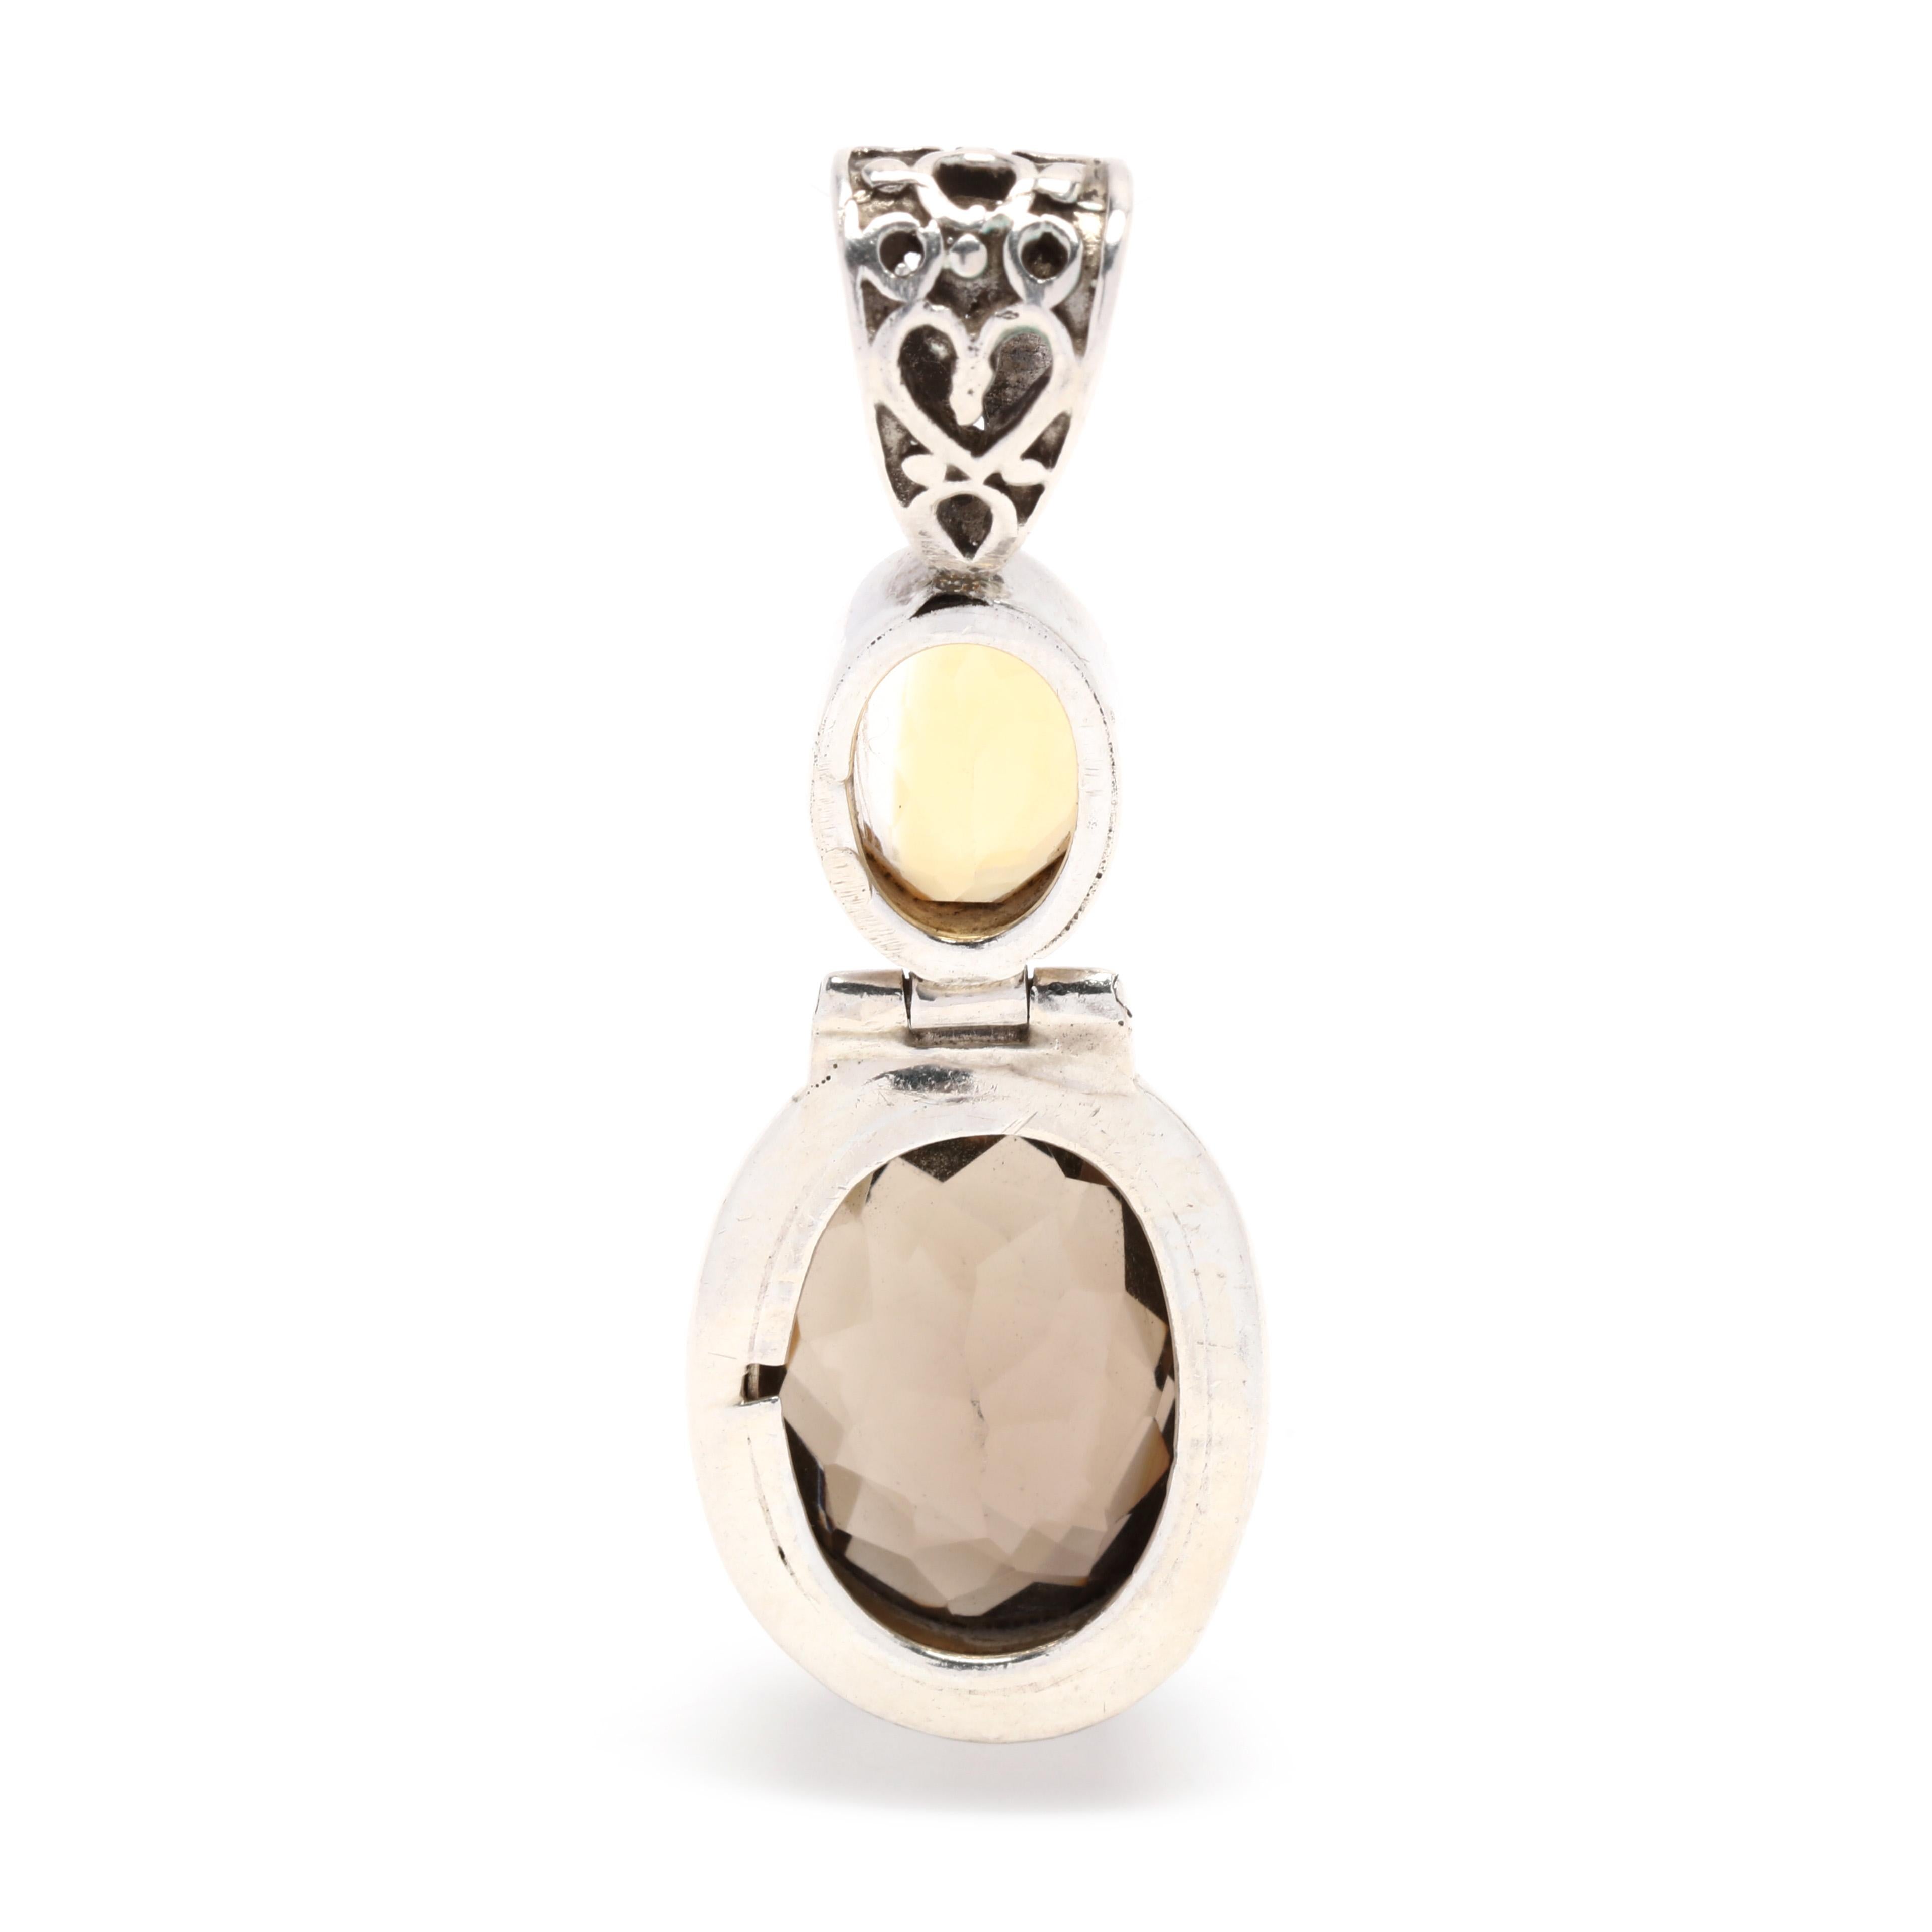 This stunning pendant features a unique combination of a citrine and smoky quartz gemstones set within sterling silver. The elegant design of the pendant measures 2.25 inches and is the perfect way to add a touch of sparkle and sophistication to any